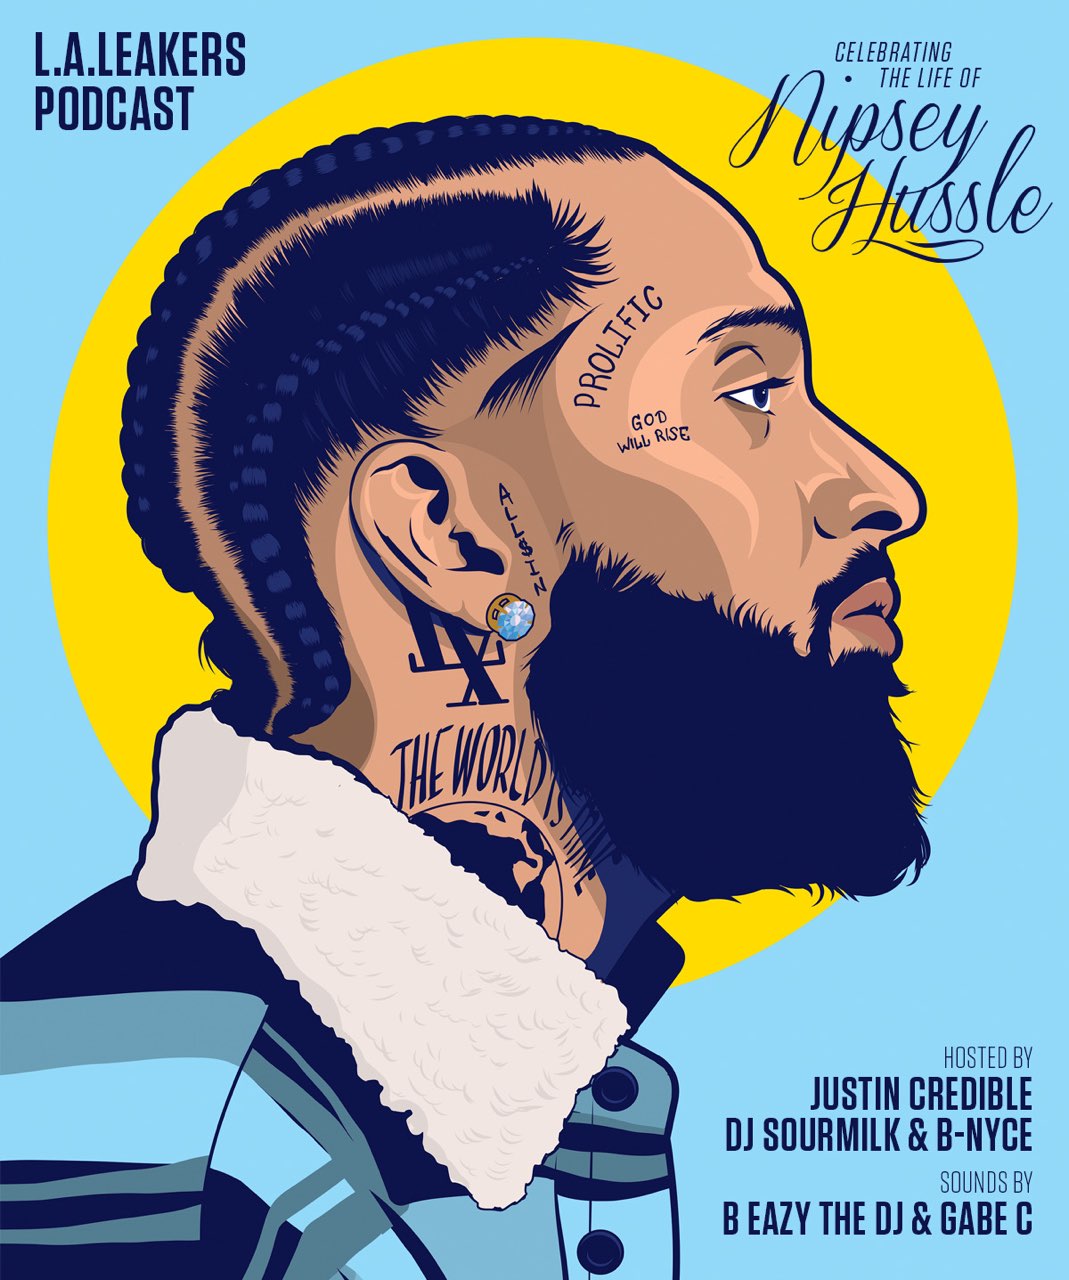 L.A. Leakers Podcast: Celebrating The Life Of Nipsey Hussle [LISTEN]